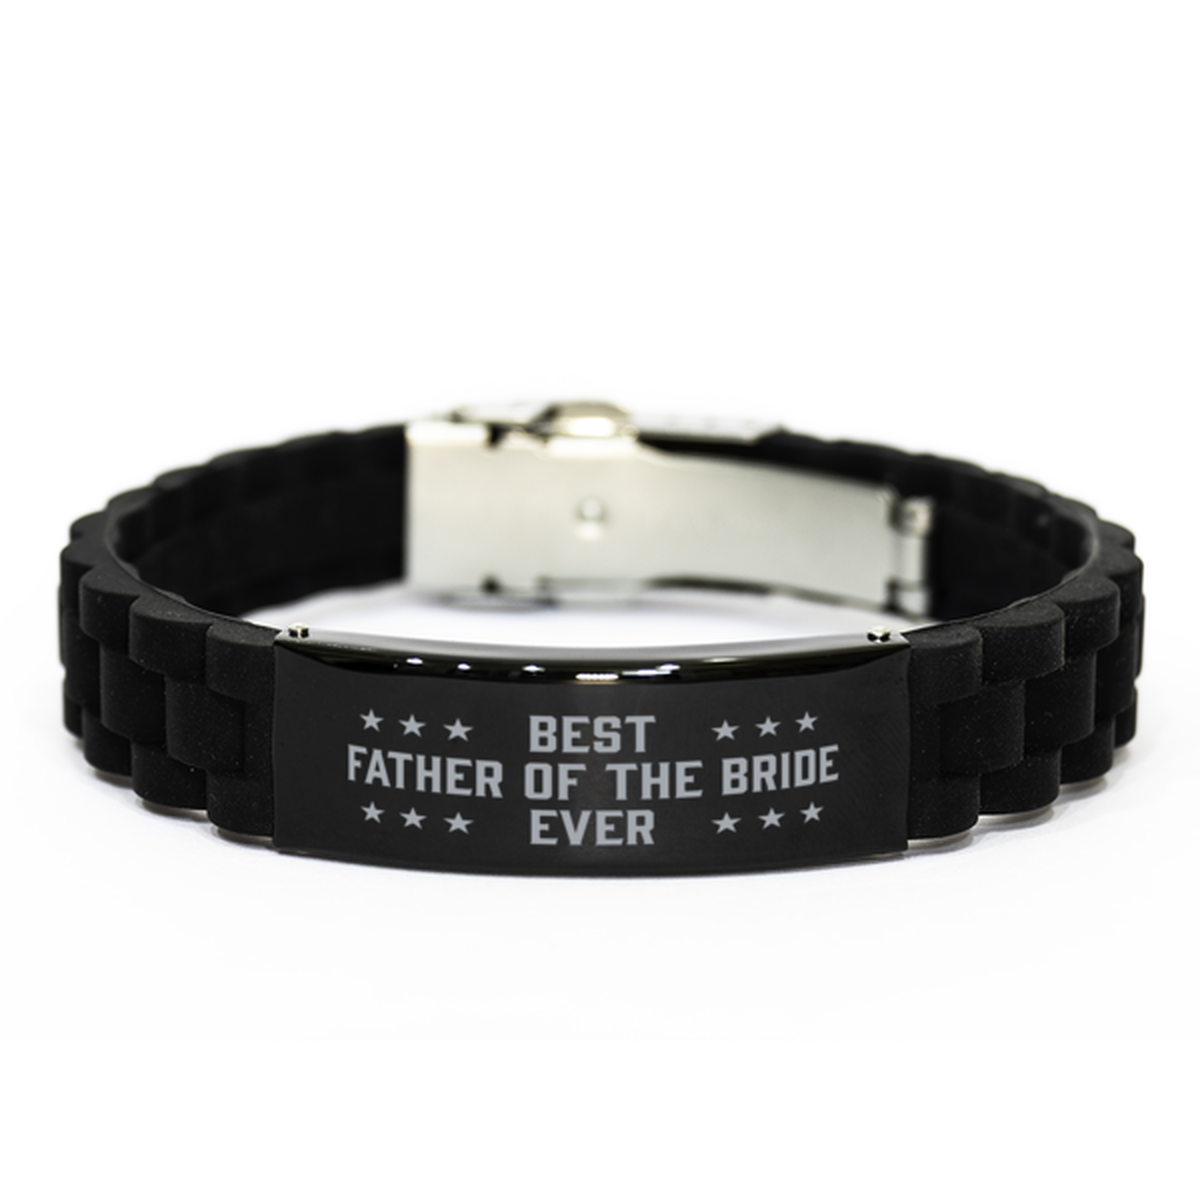 Best Father of the bride Ever Father of the bride Gifts, Funny Black Engraved Bracelet For Father of the bride, Family Gifts For Men